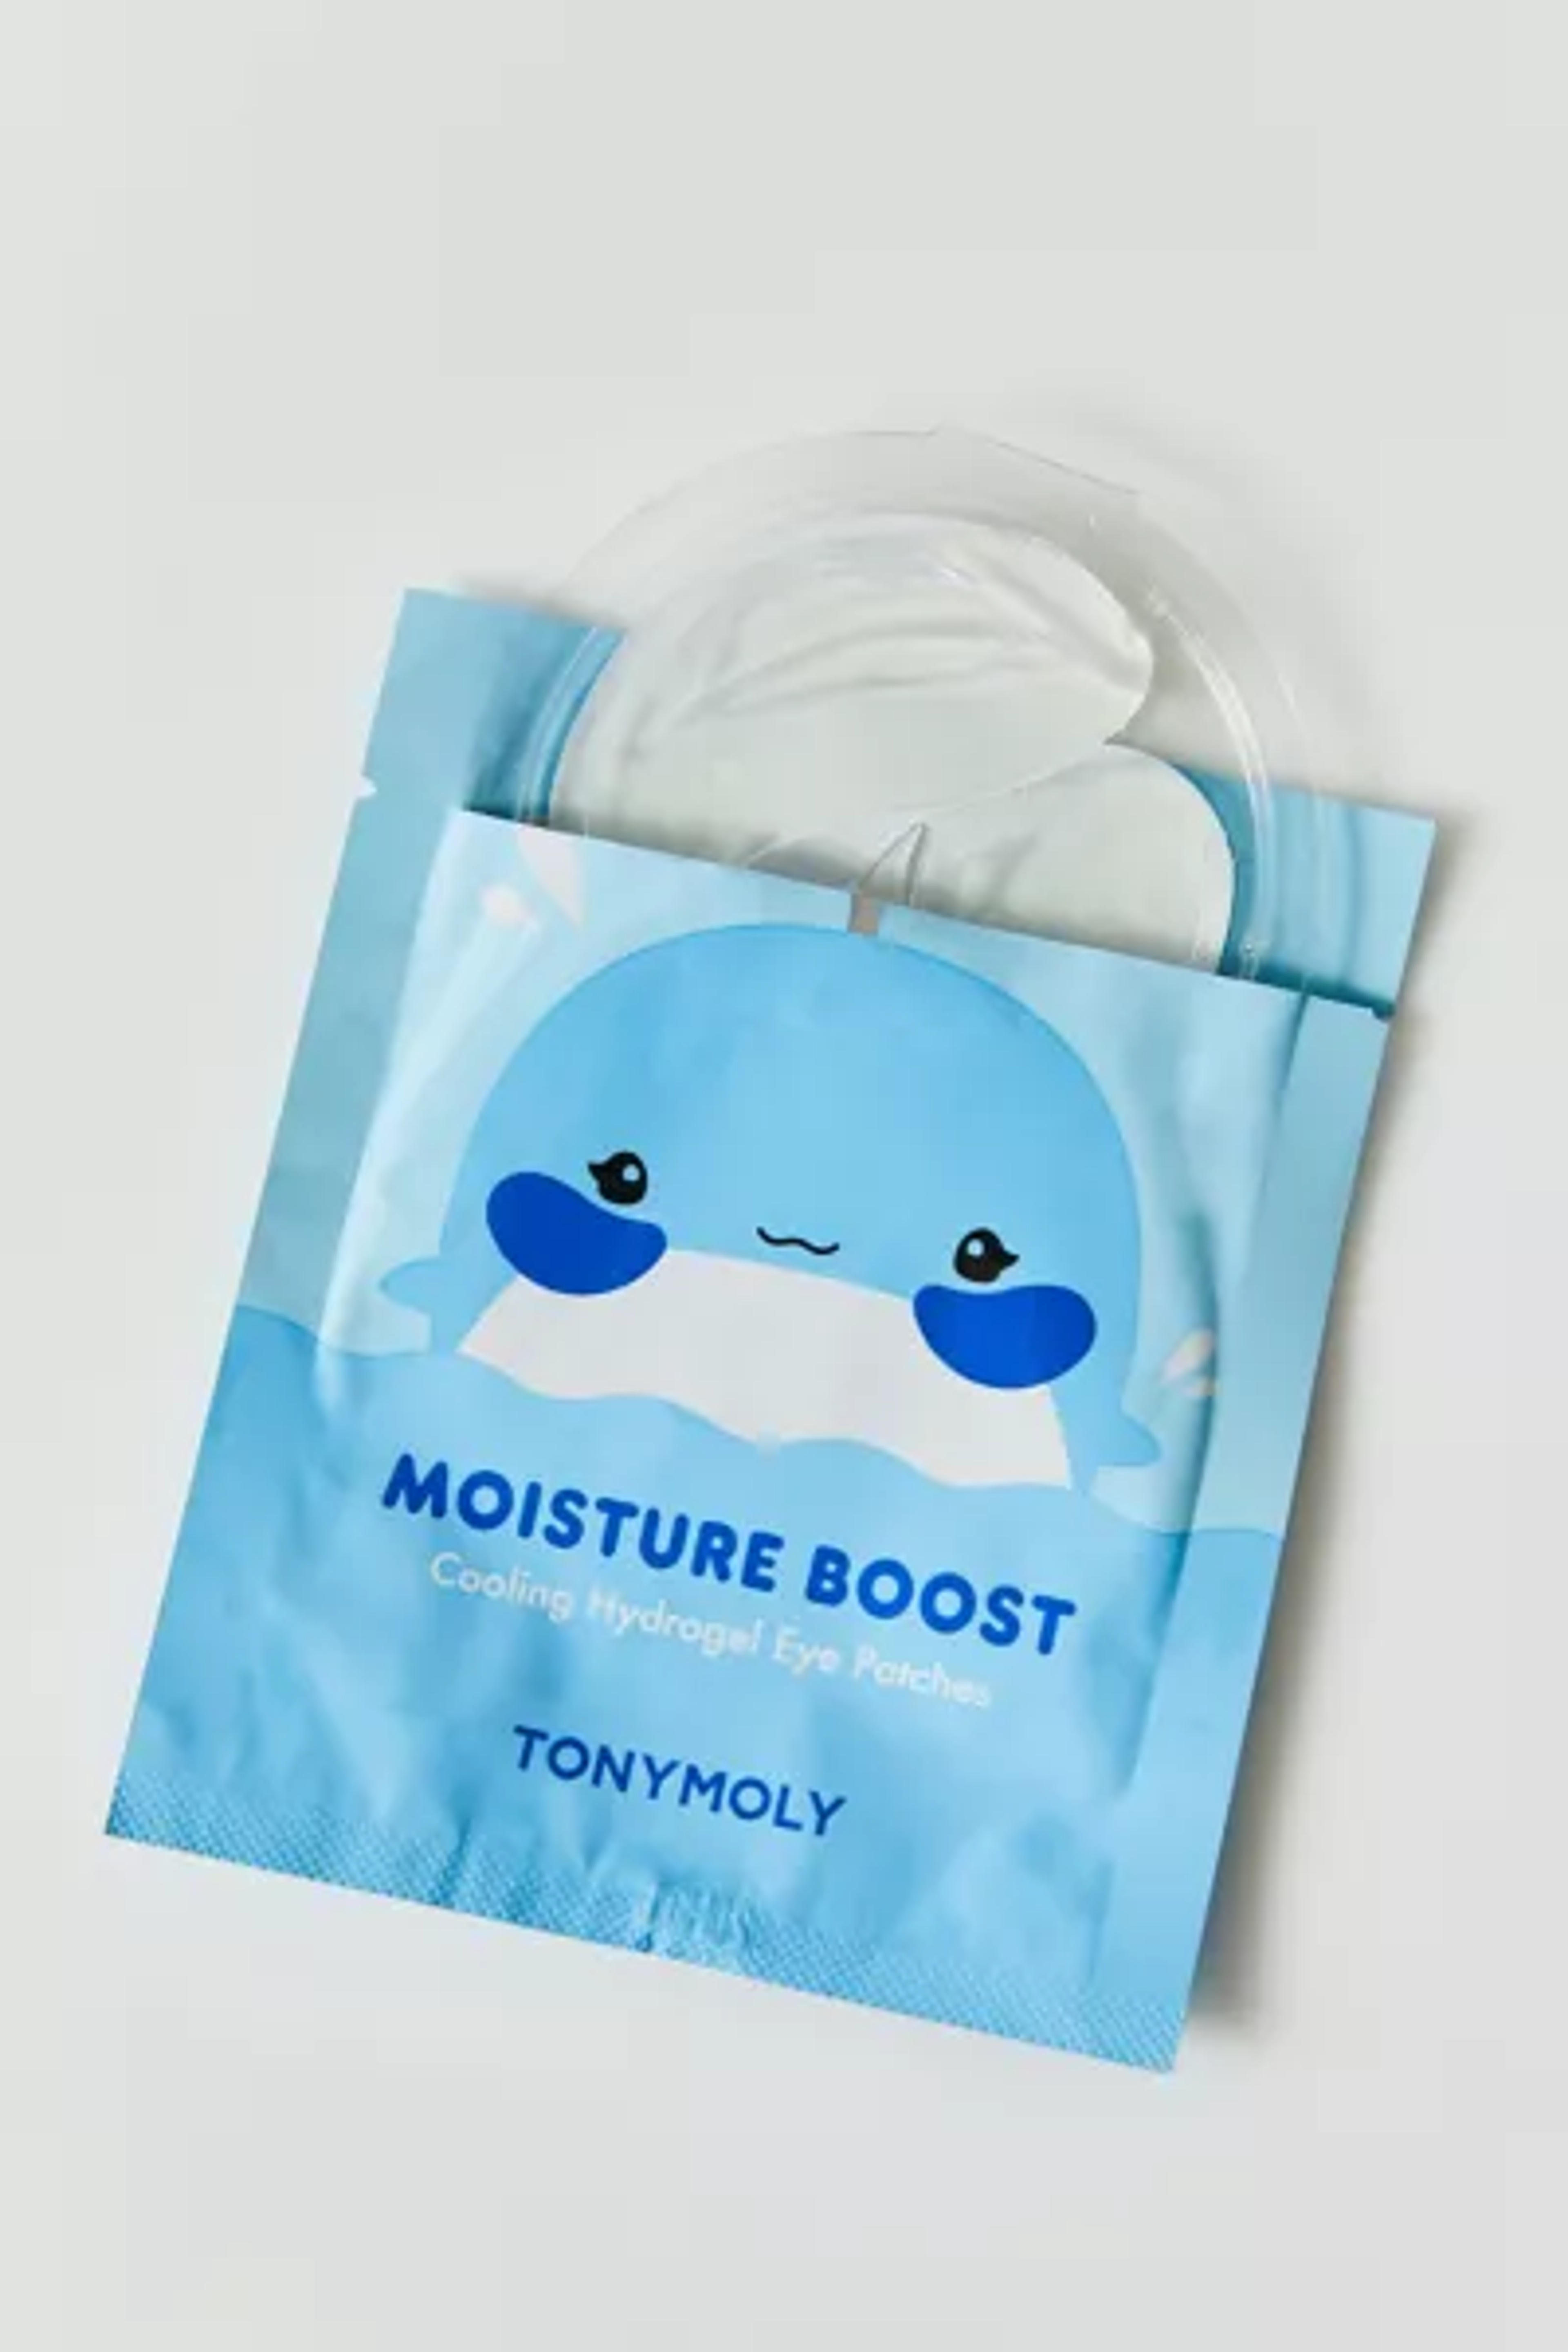 TONYMOLY Moisture Boost Cooling Hydrogel Eye Patch | Urban Outfitters